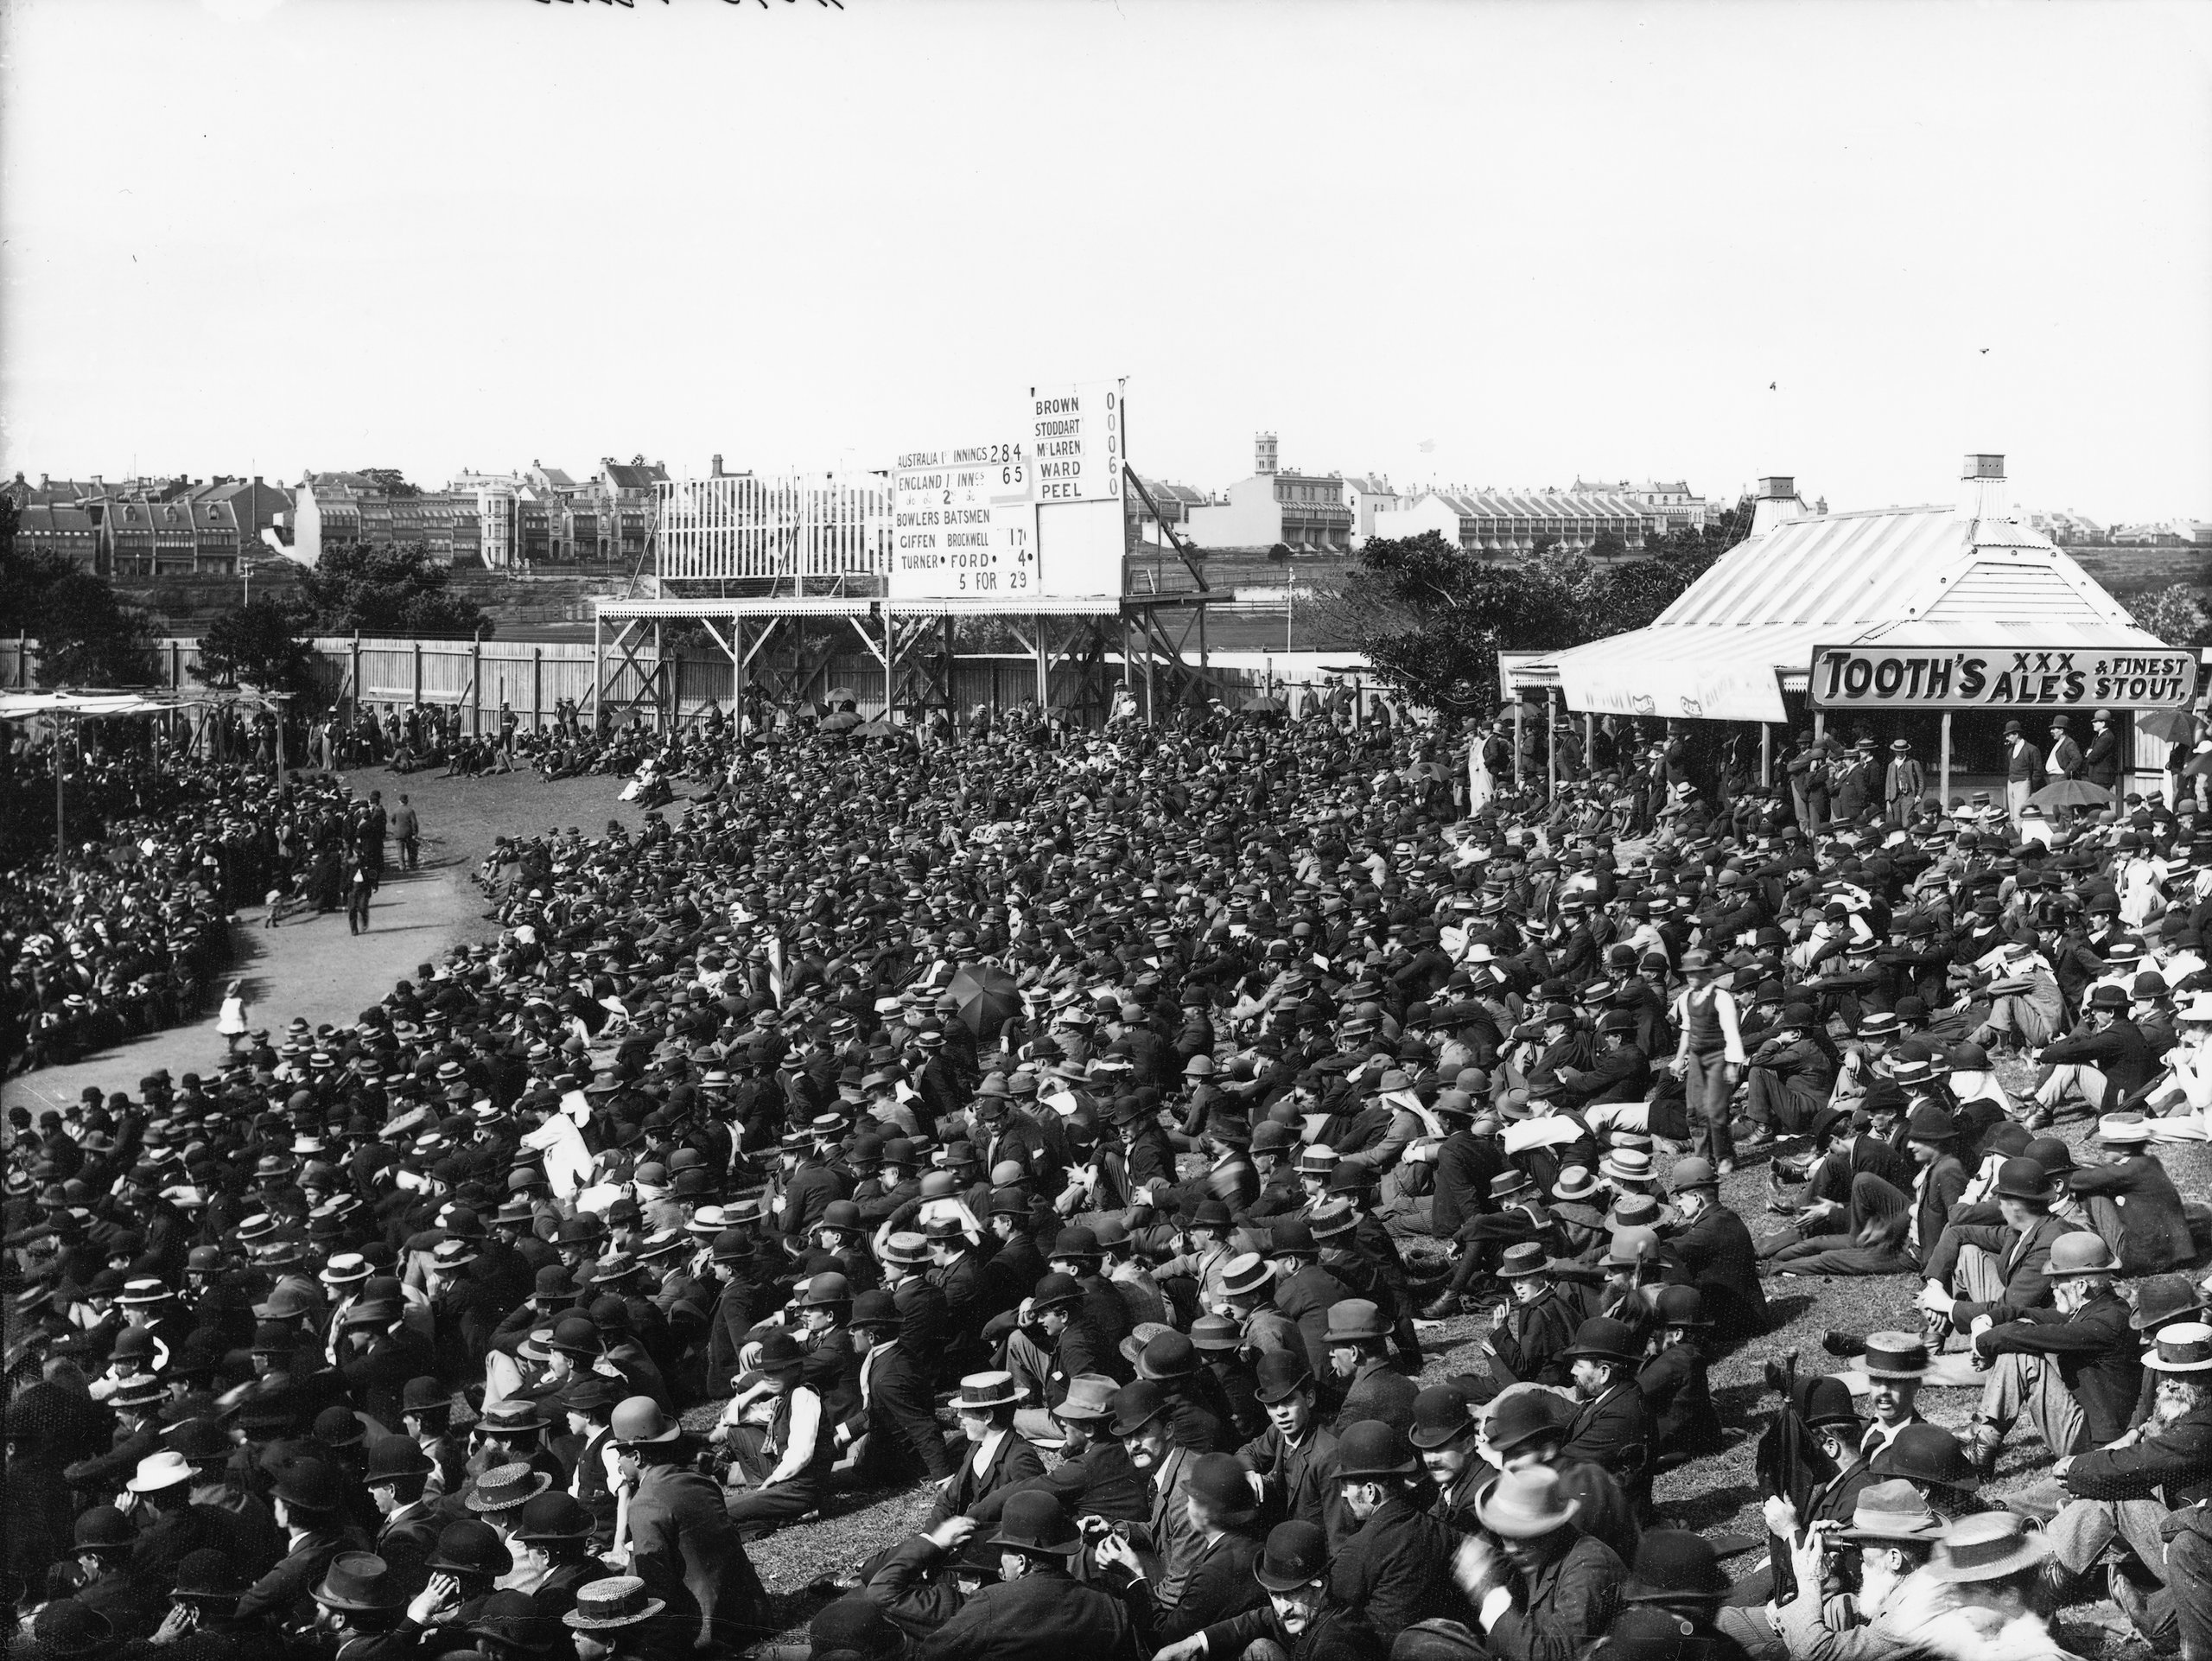 'Cricket Grounds, 1895' plate negative from the Tyrrell Collection